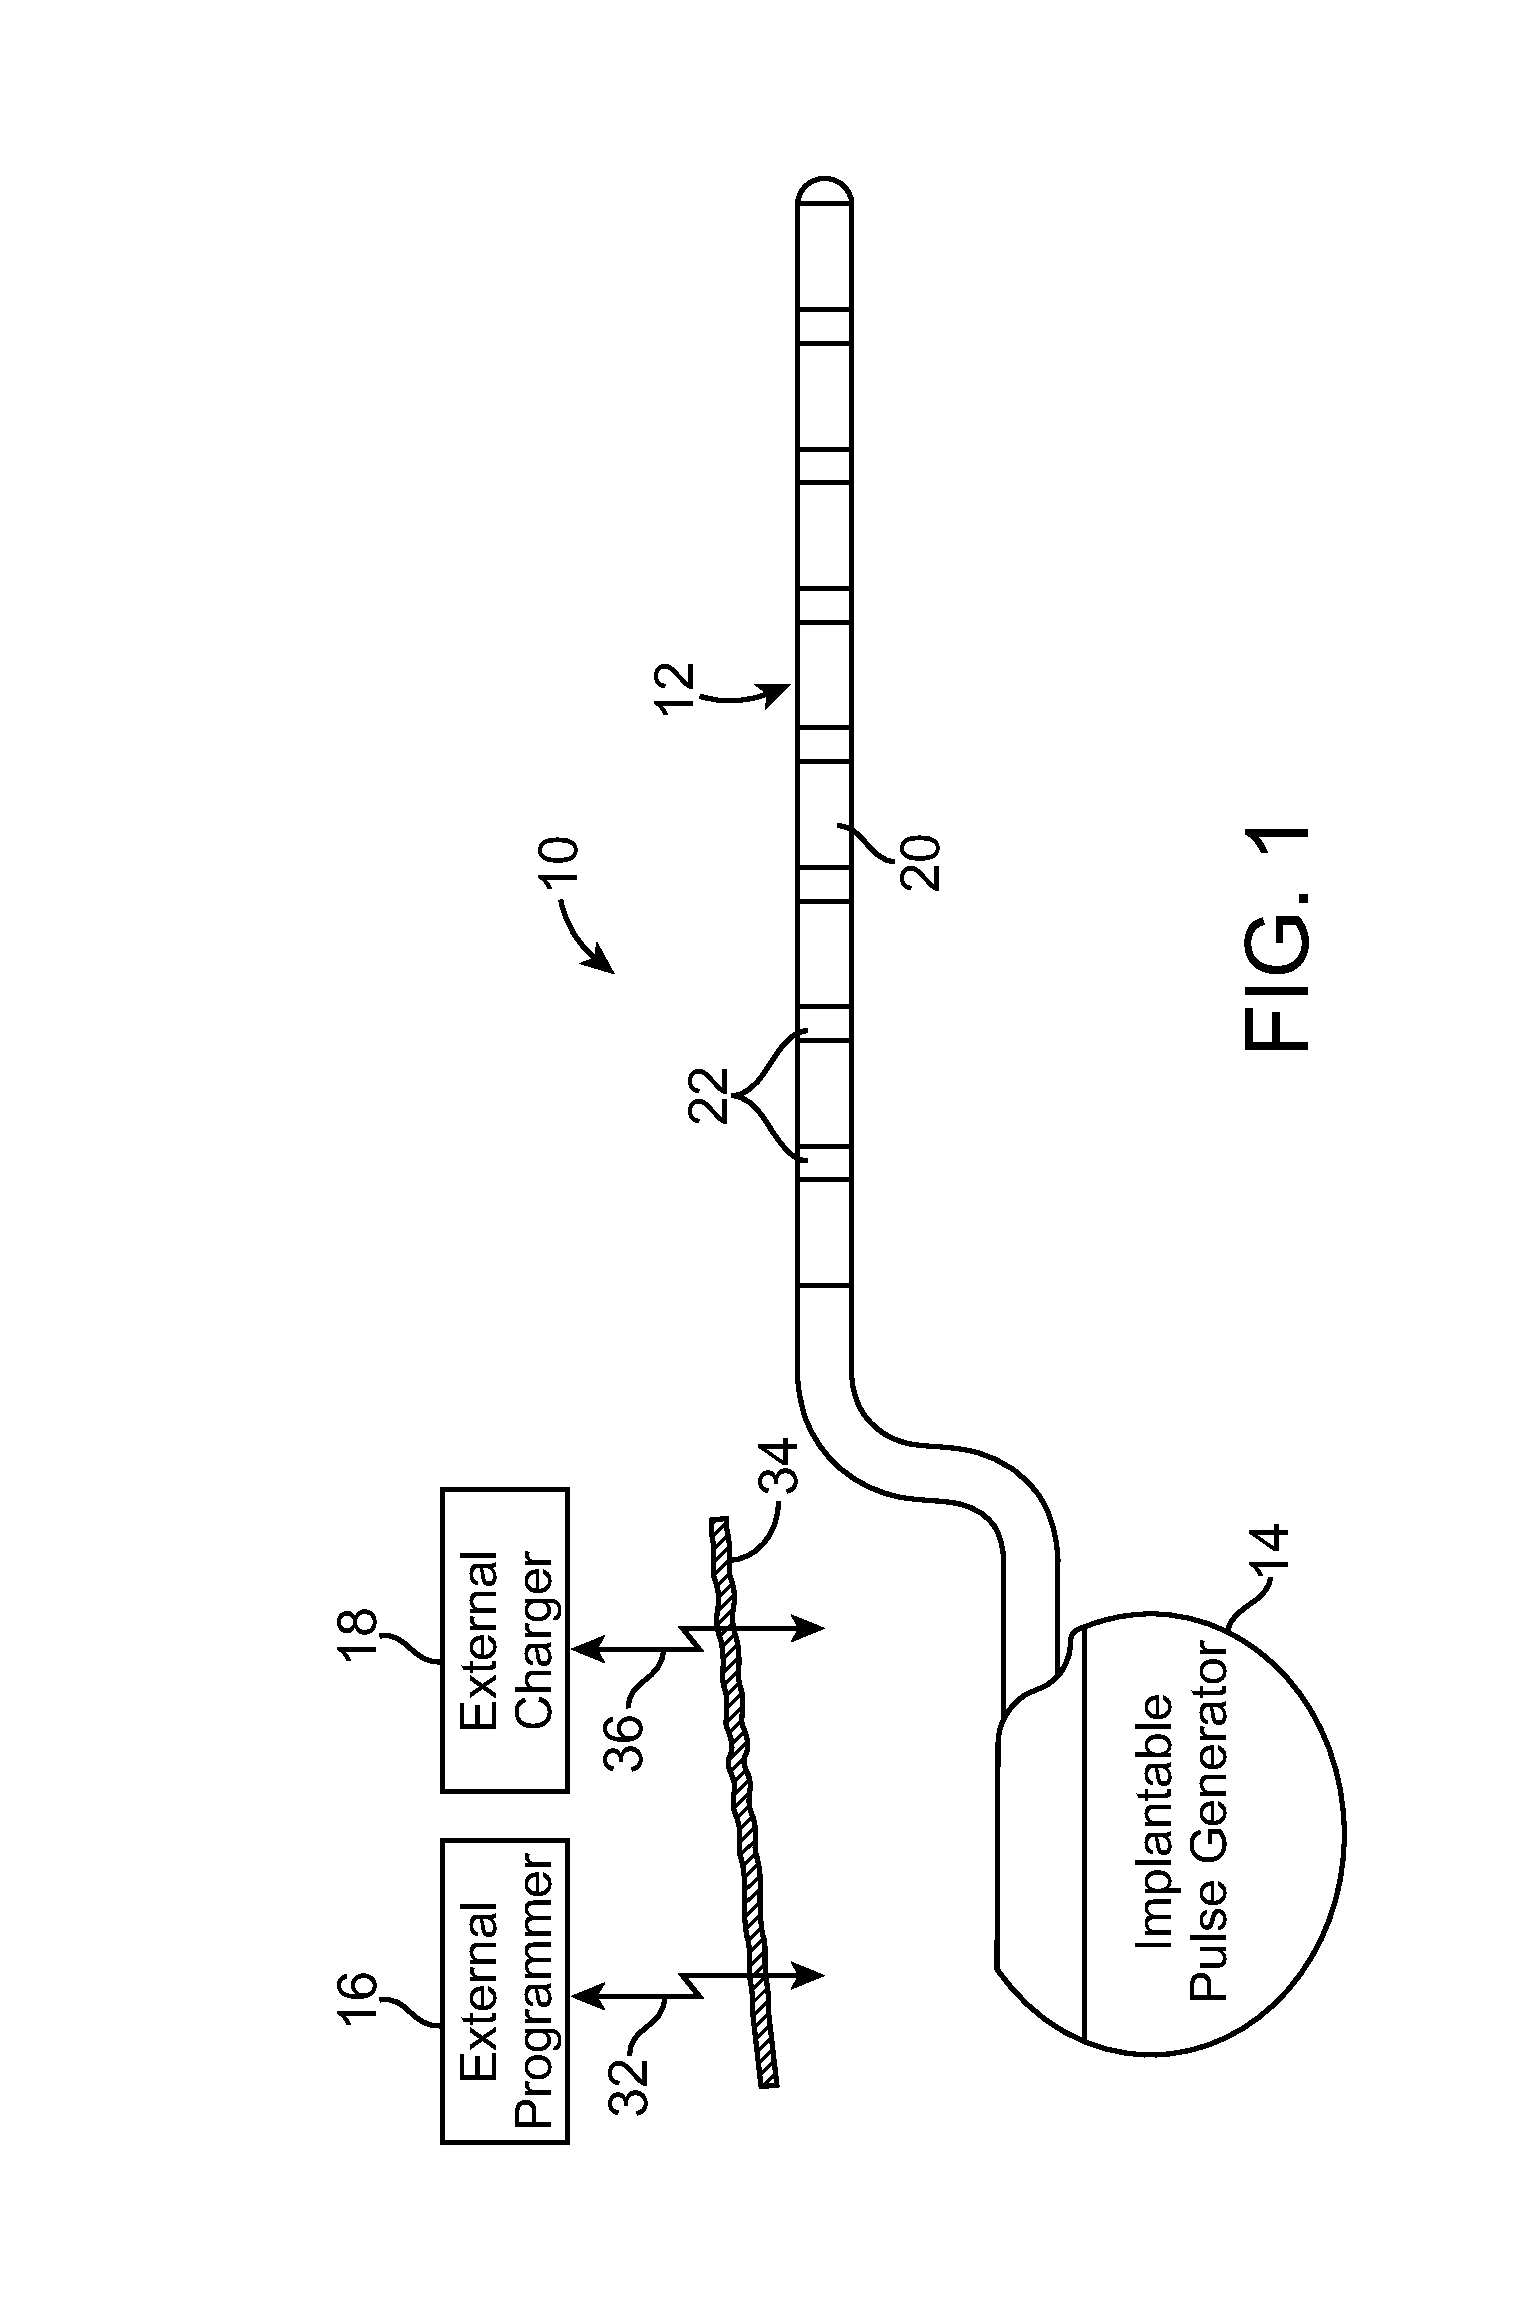 Moldable charger having hinged sections for charging an implantable pulse generator